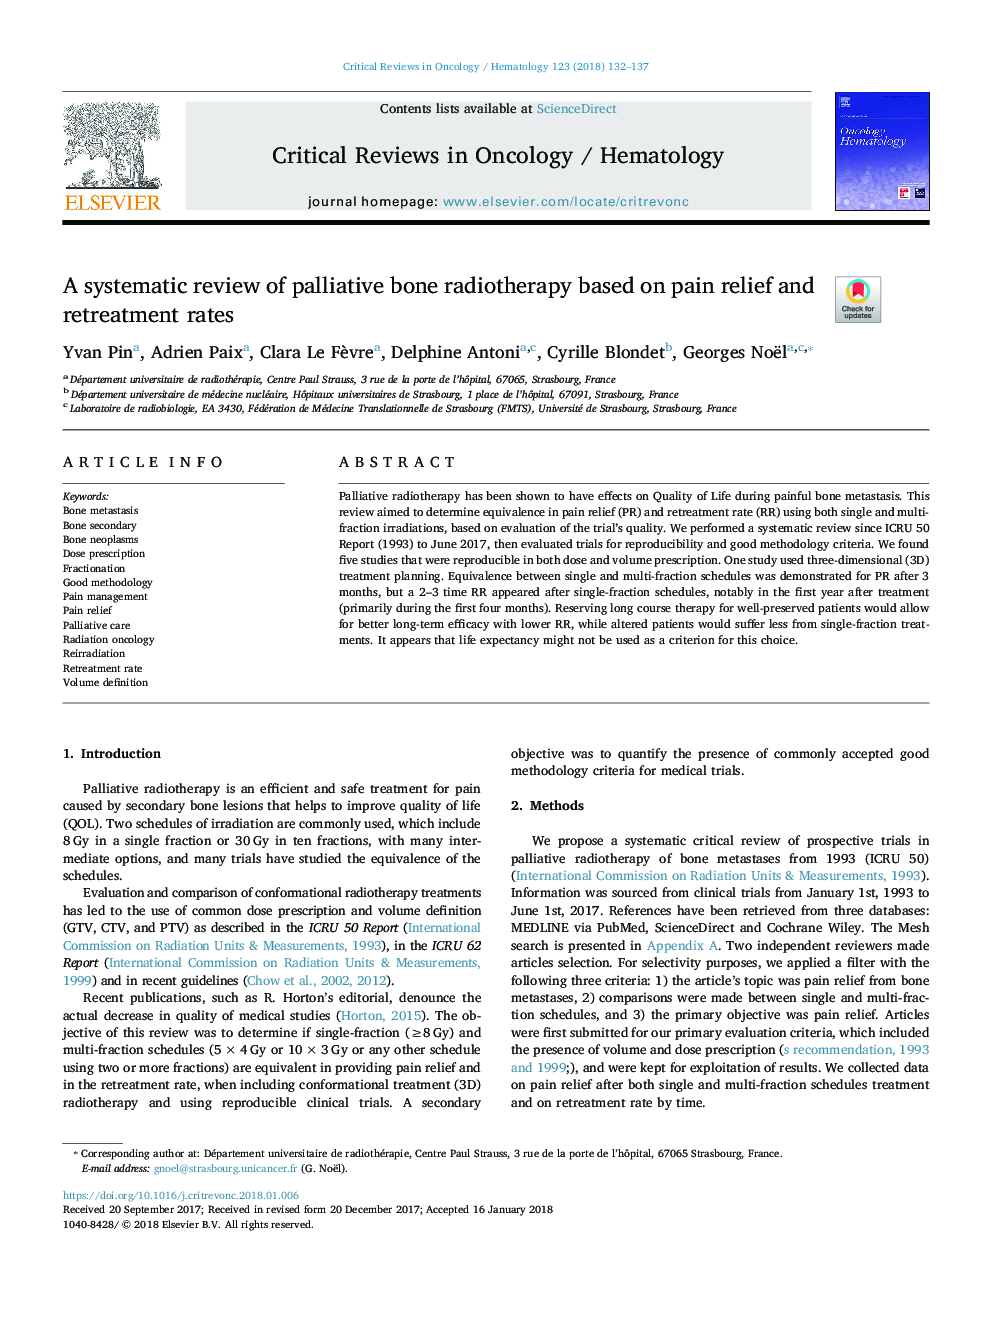 A systematic review of palliative bone radiotherapy based on pain relief and retreatment rates